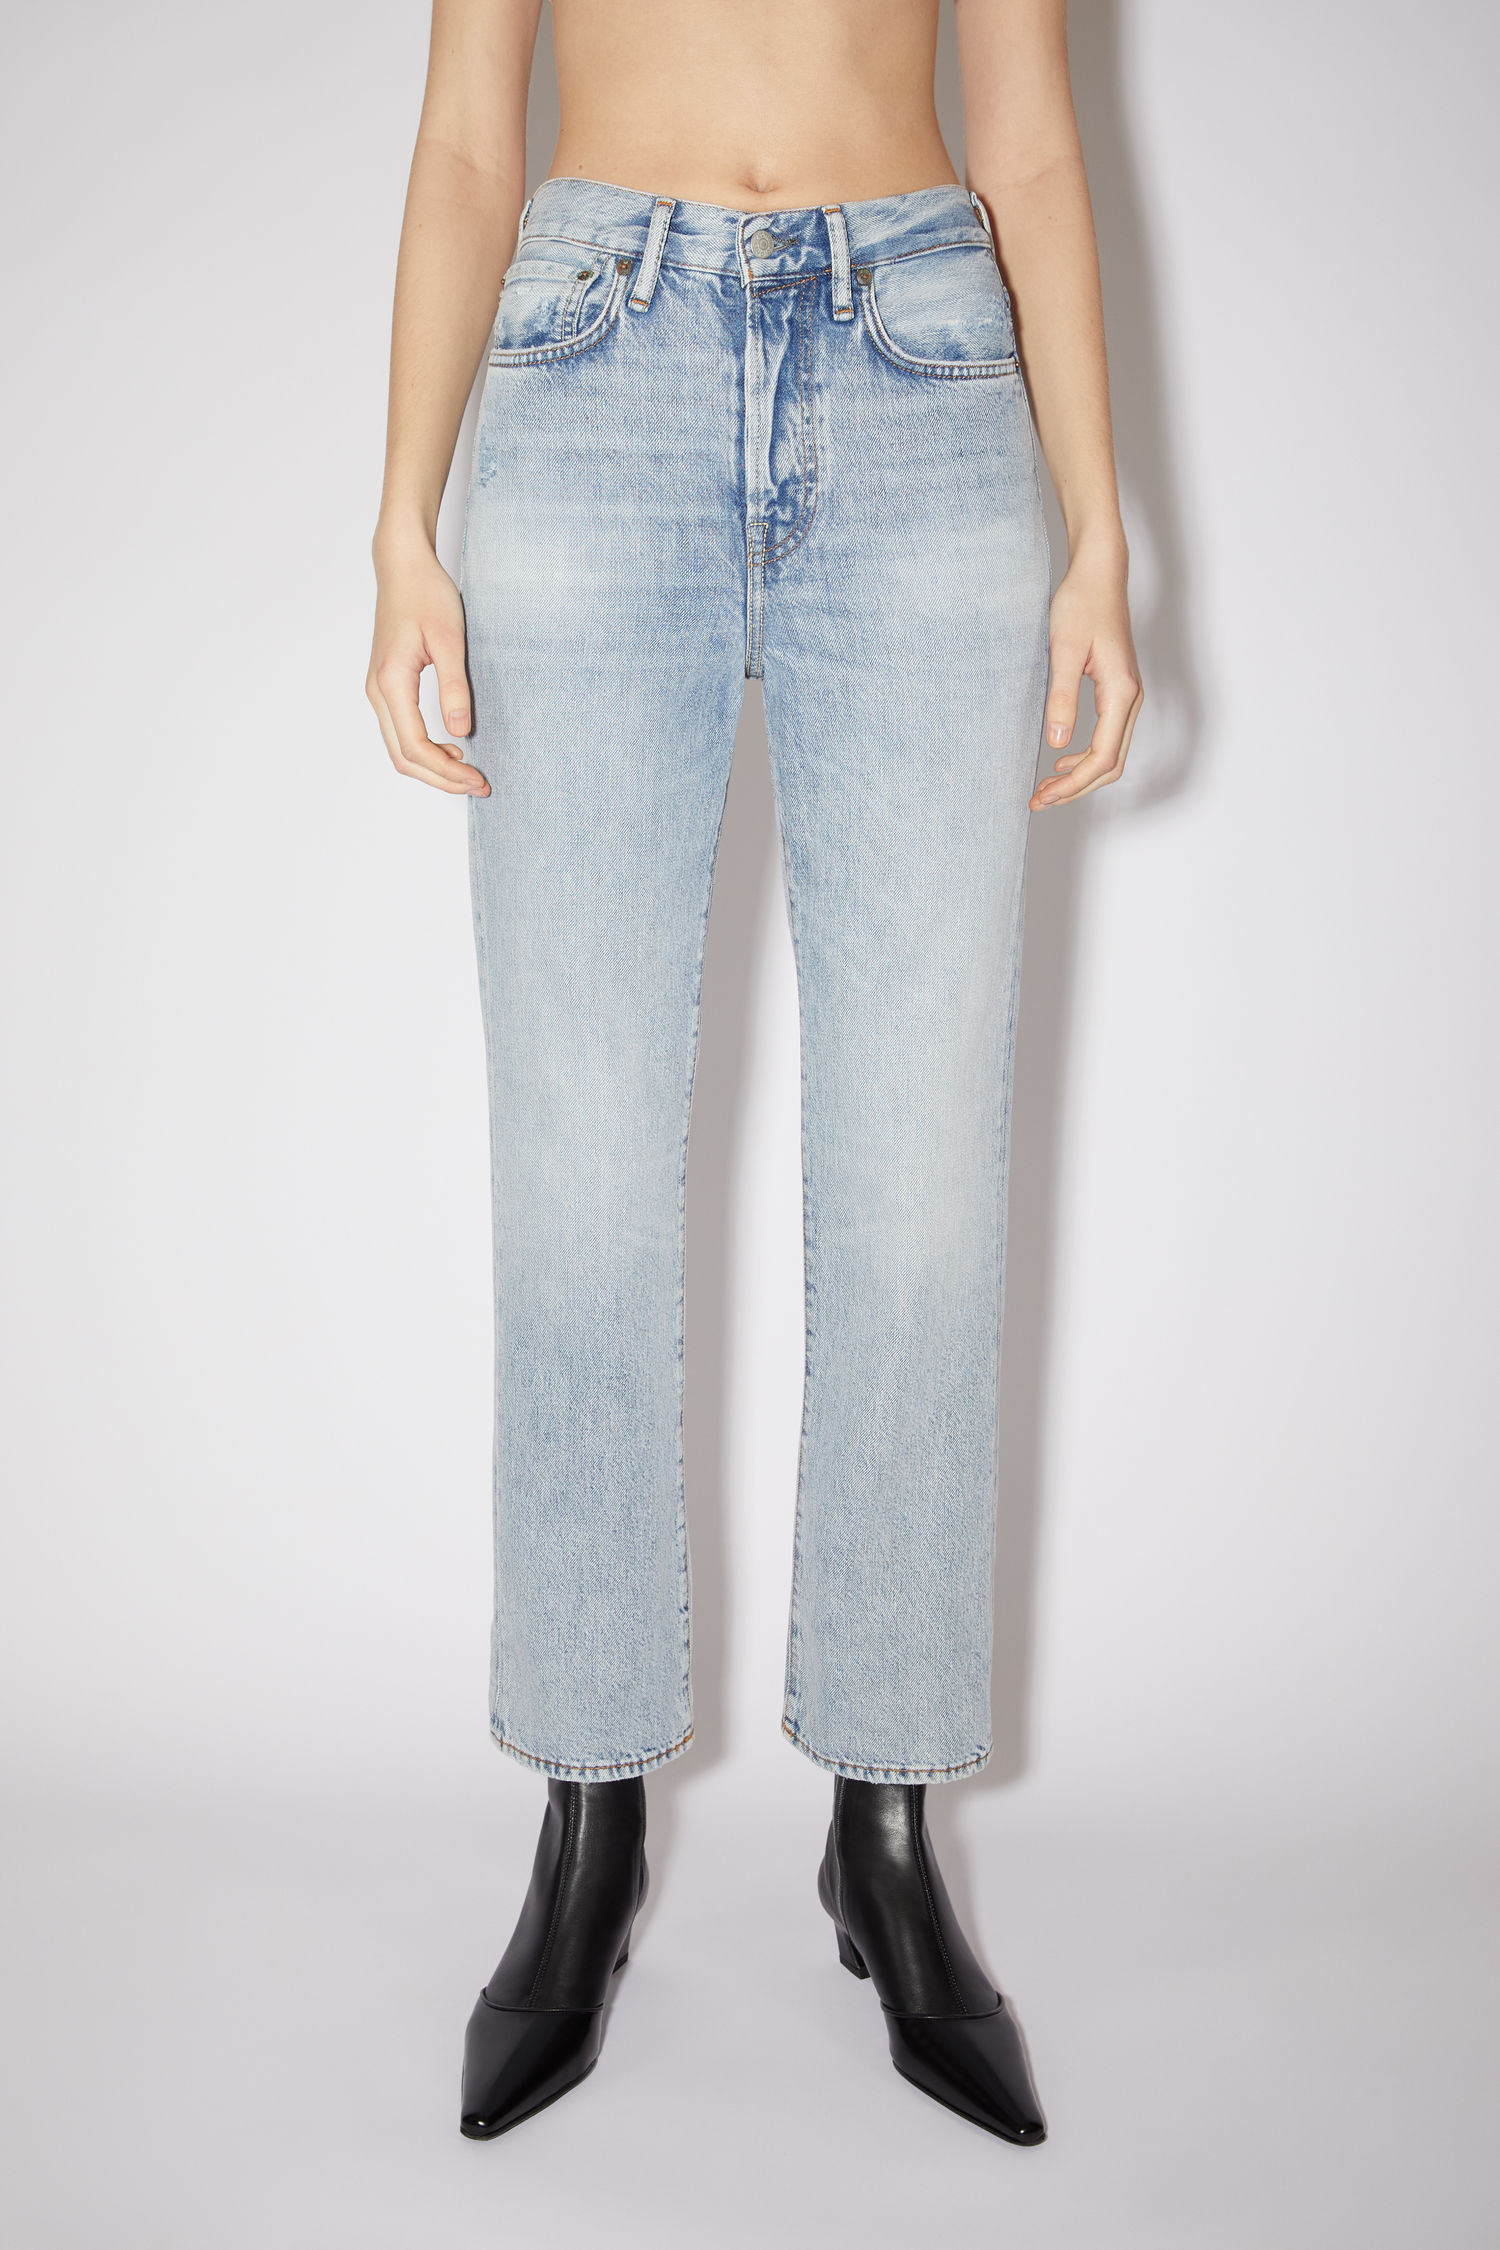 forord malm ulovlig Acne Studios - Straight fit jeans - Light blue